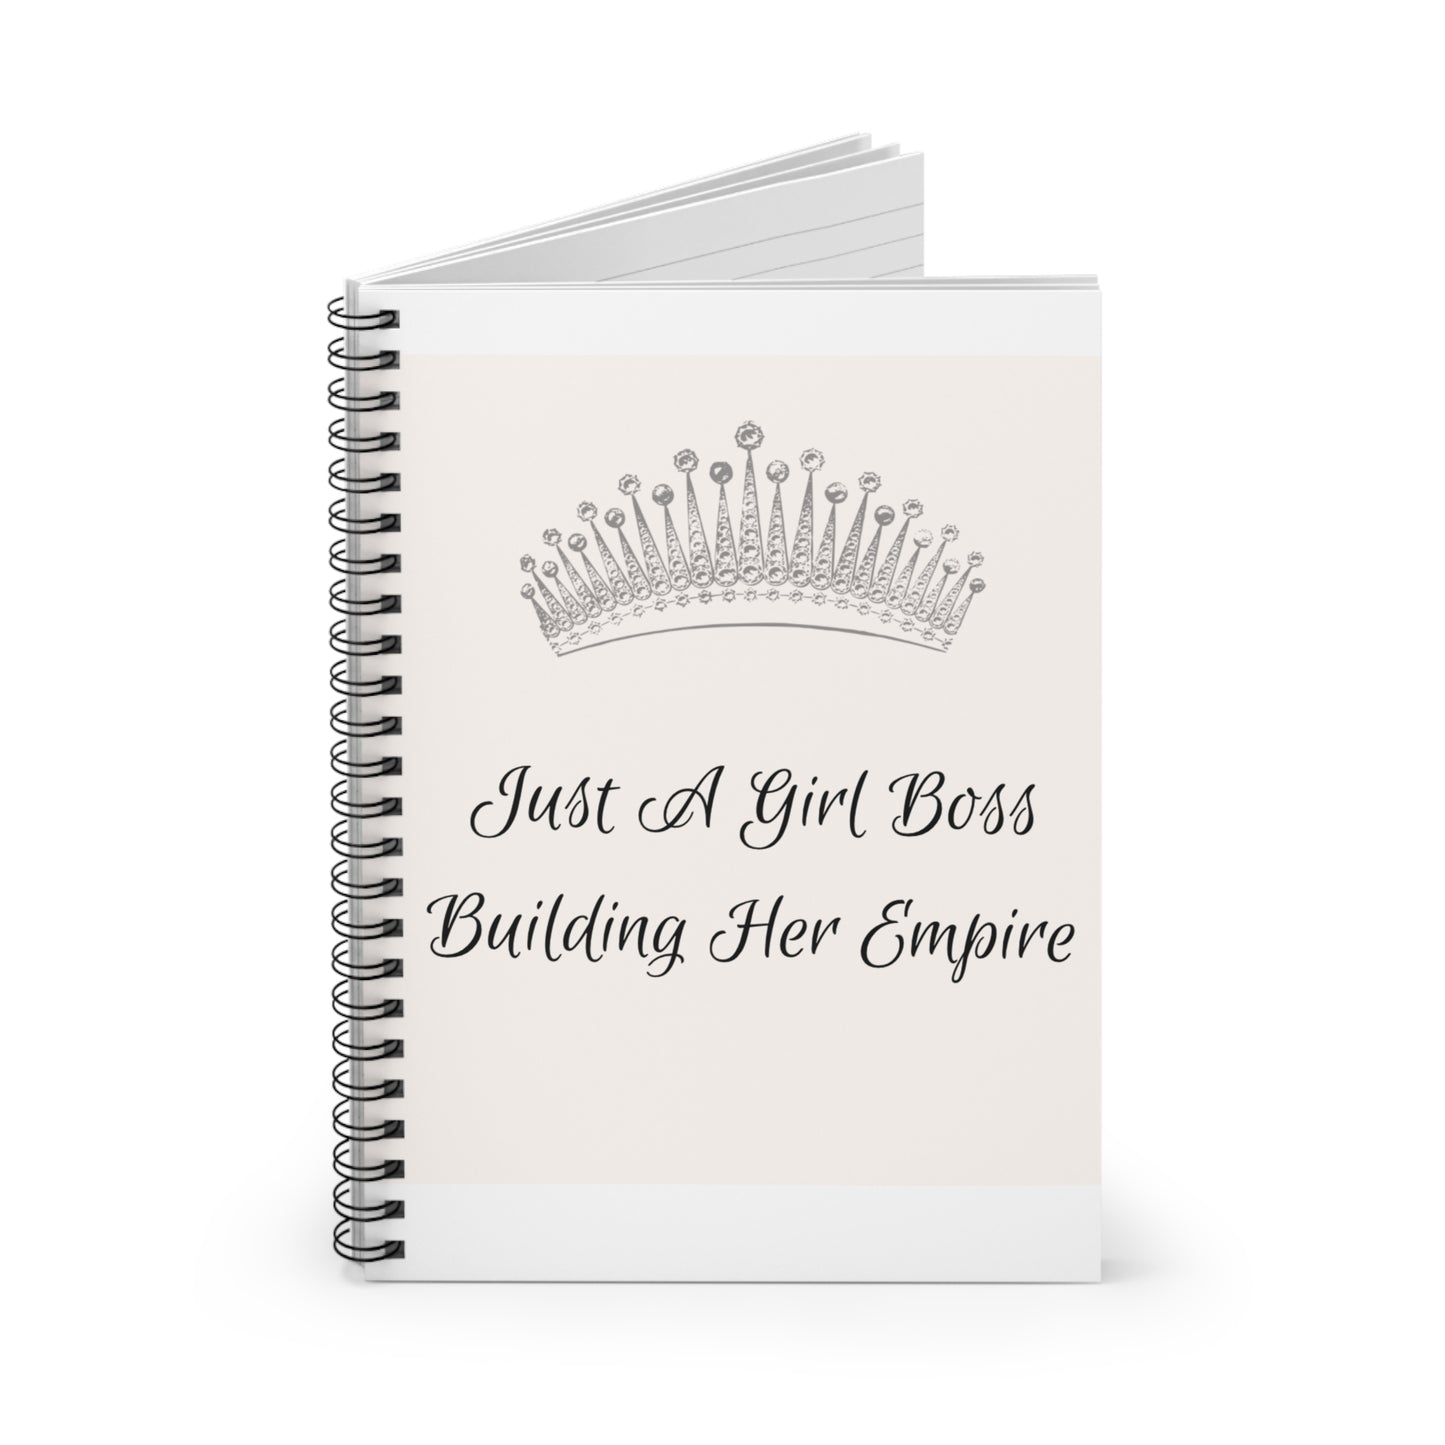 Just a girl boss building her empire Spiral Notebook - Ruled Line